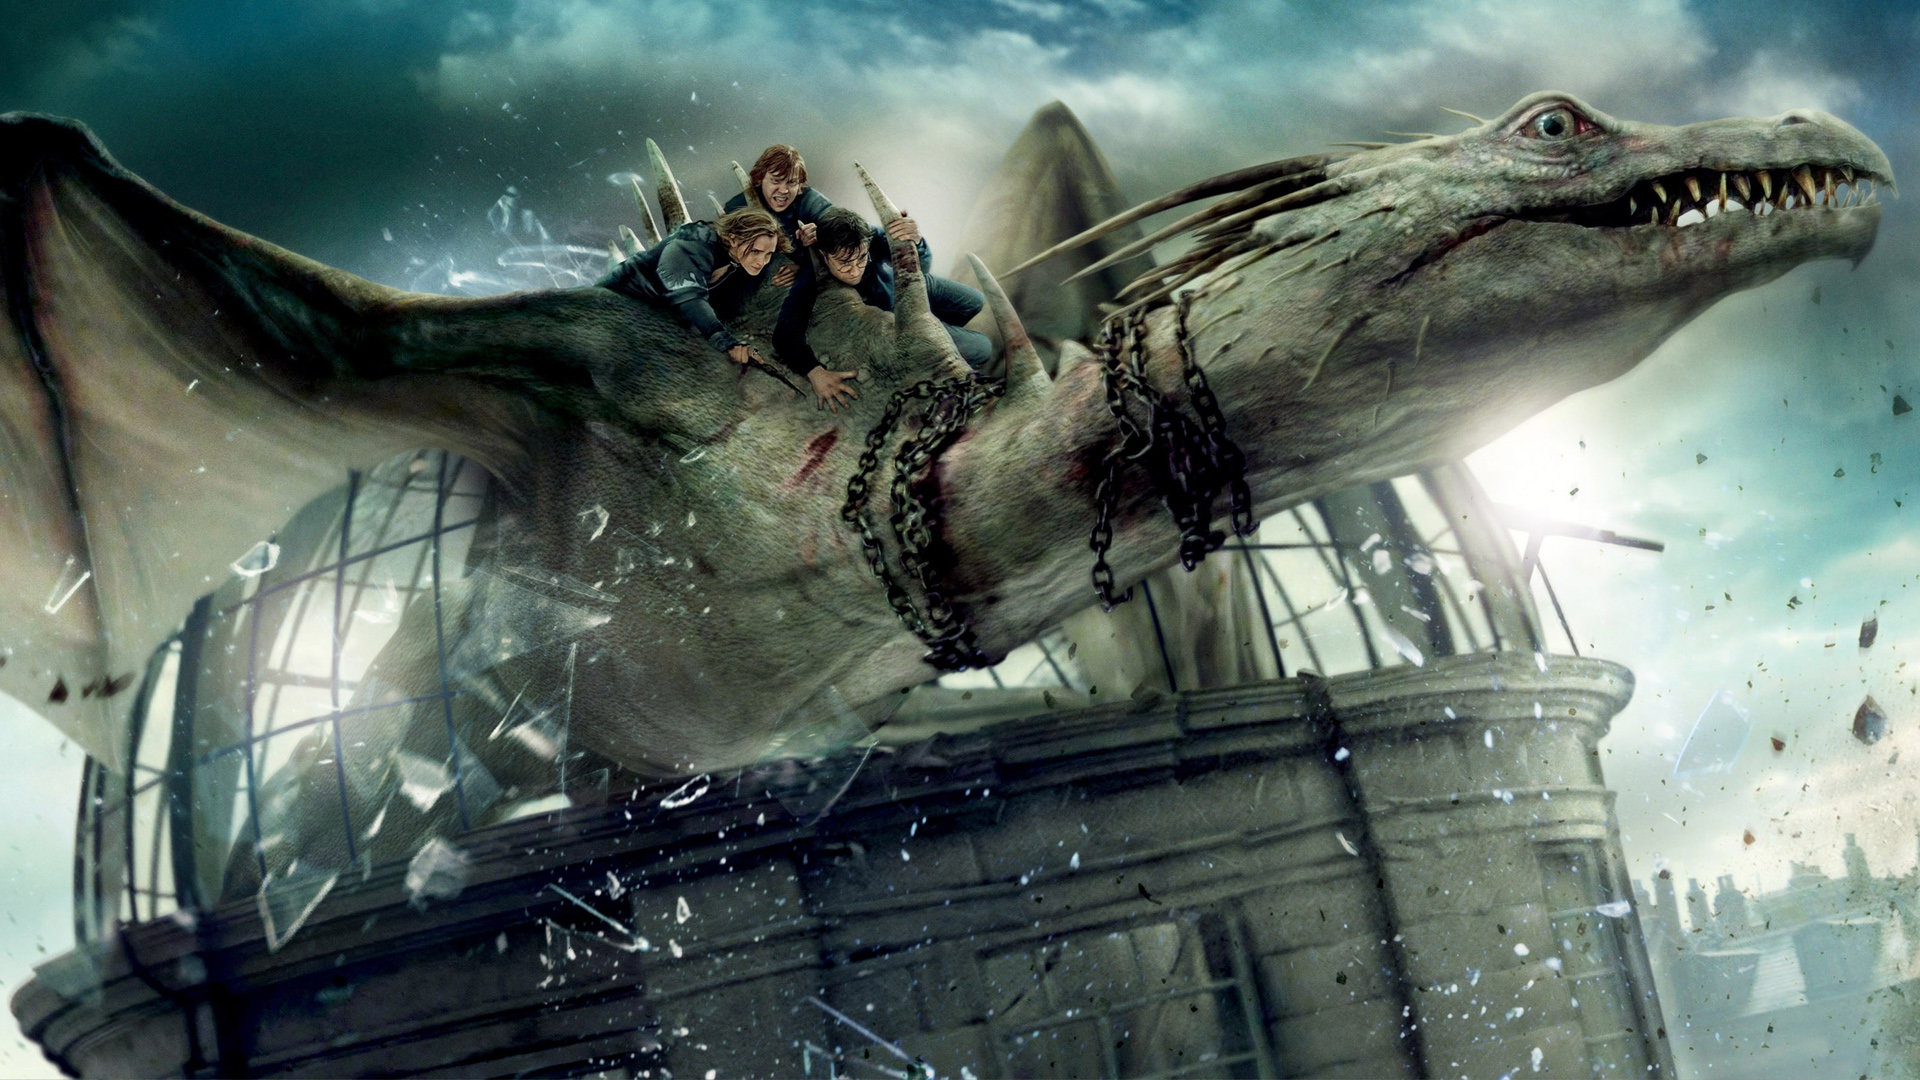 High resolution Harry Potter And The Deathly Hallows: Part 2 full hd 1080p background ID:32513 for desktop